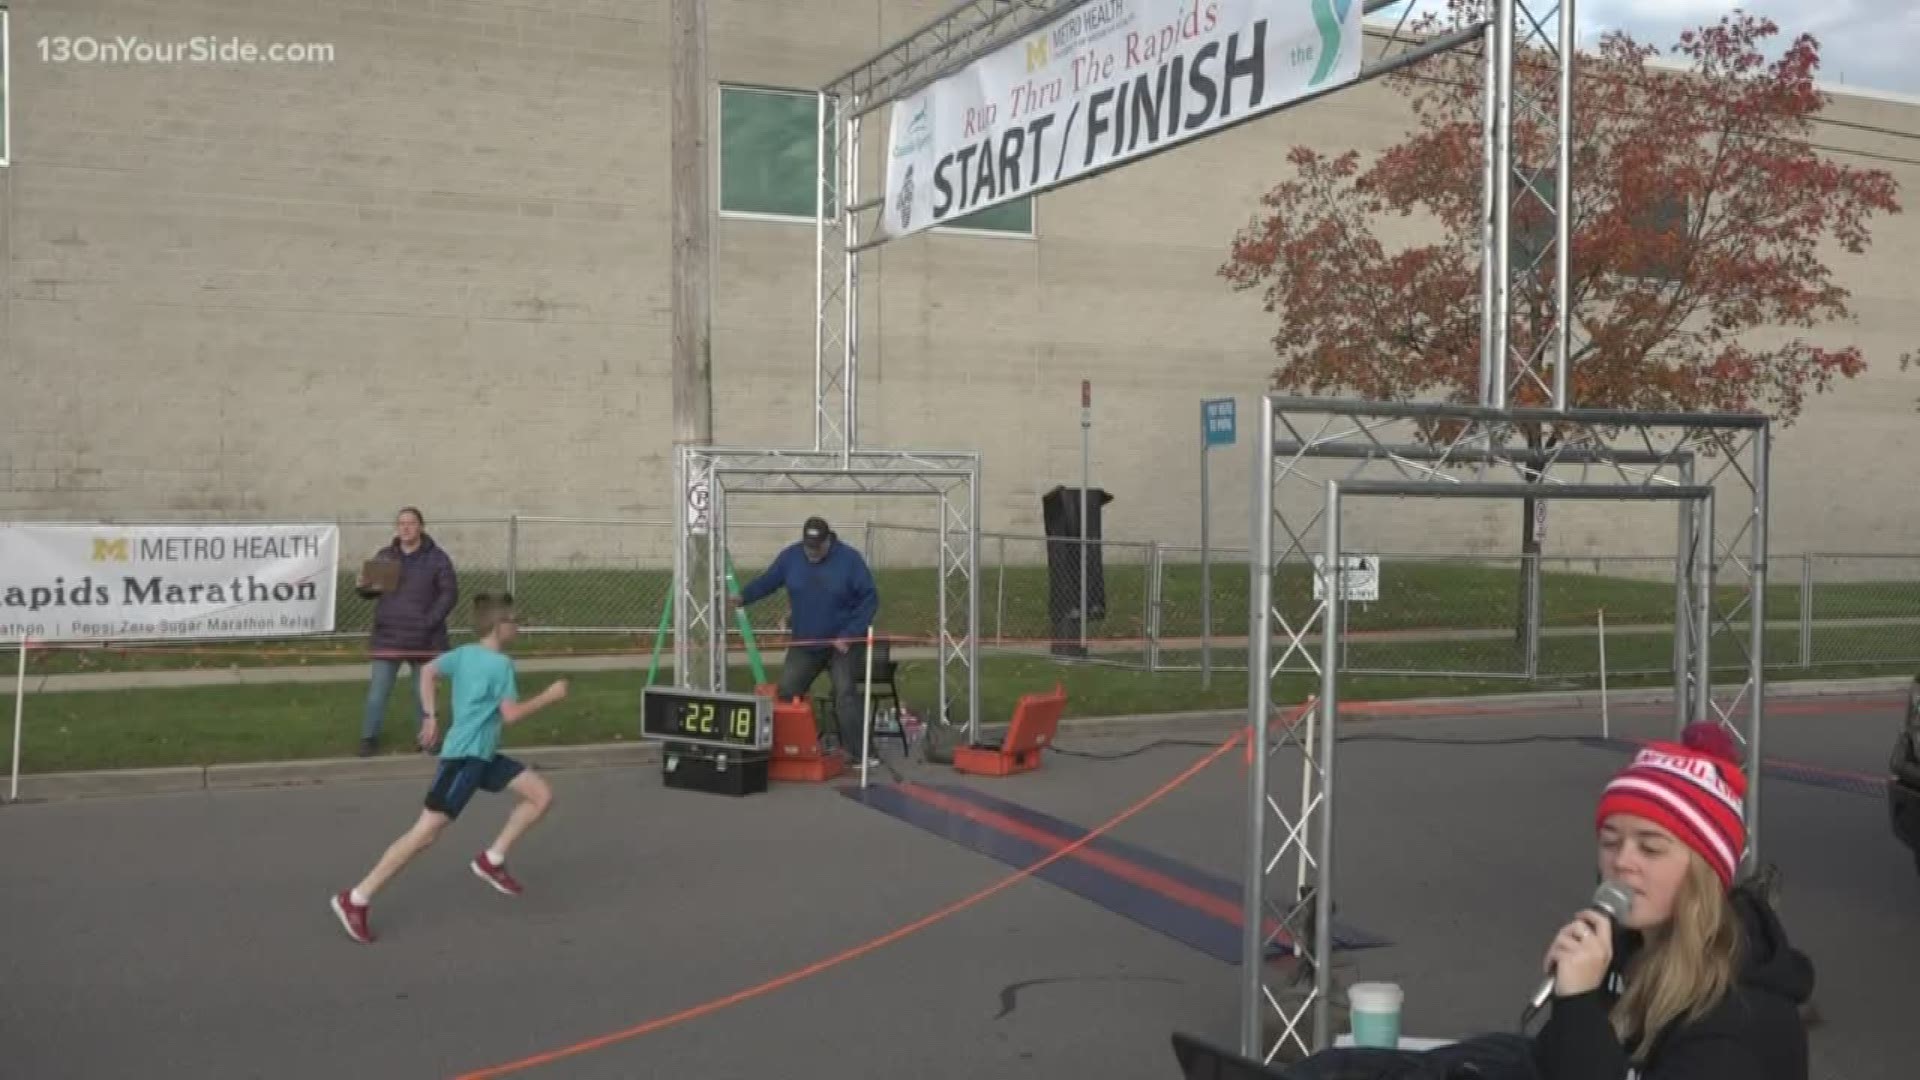 Metro Health is sponsoring a number of runs this weekend, including the Grand Rapids Marathon on Sunday.